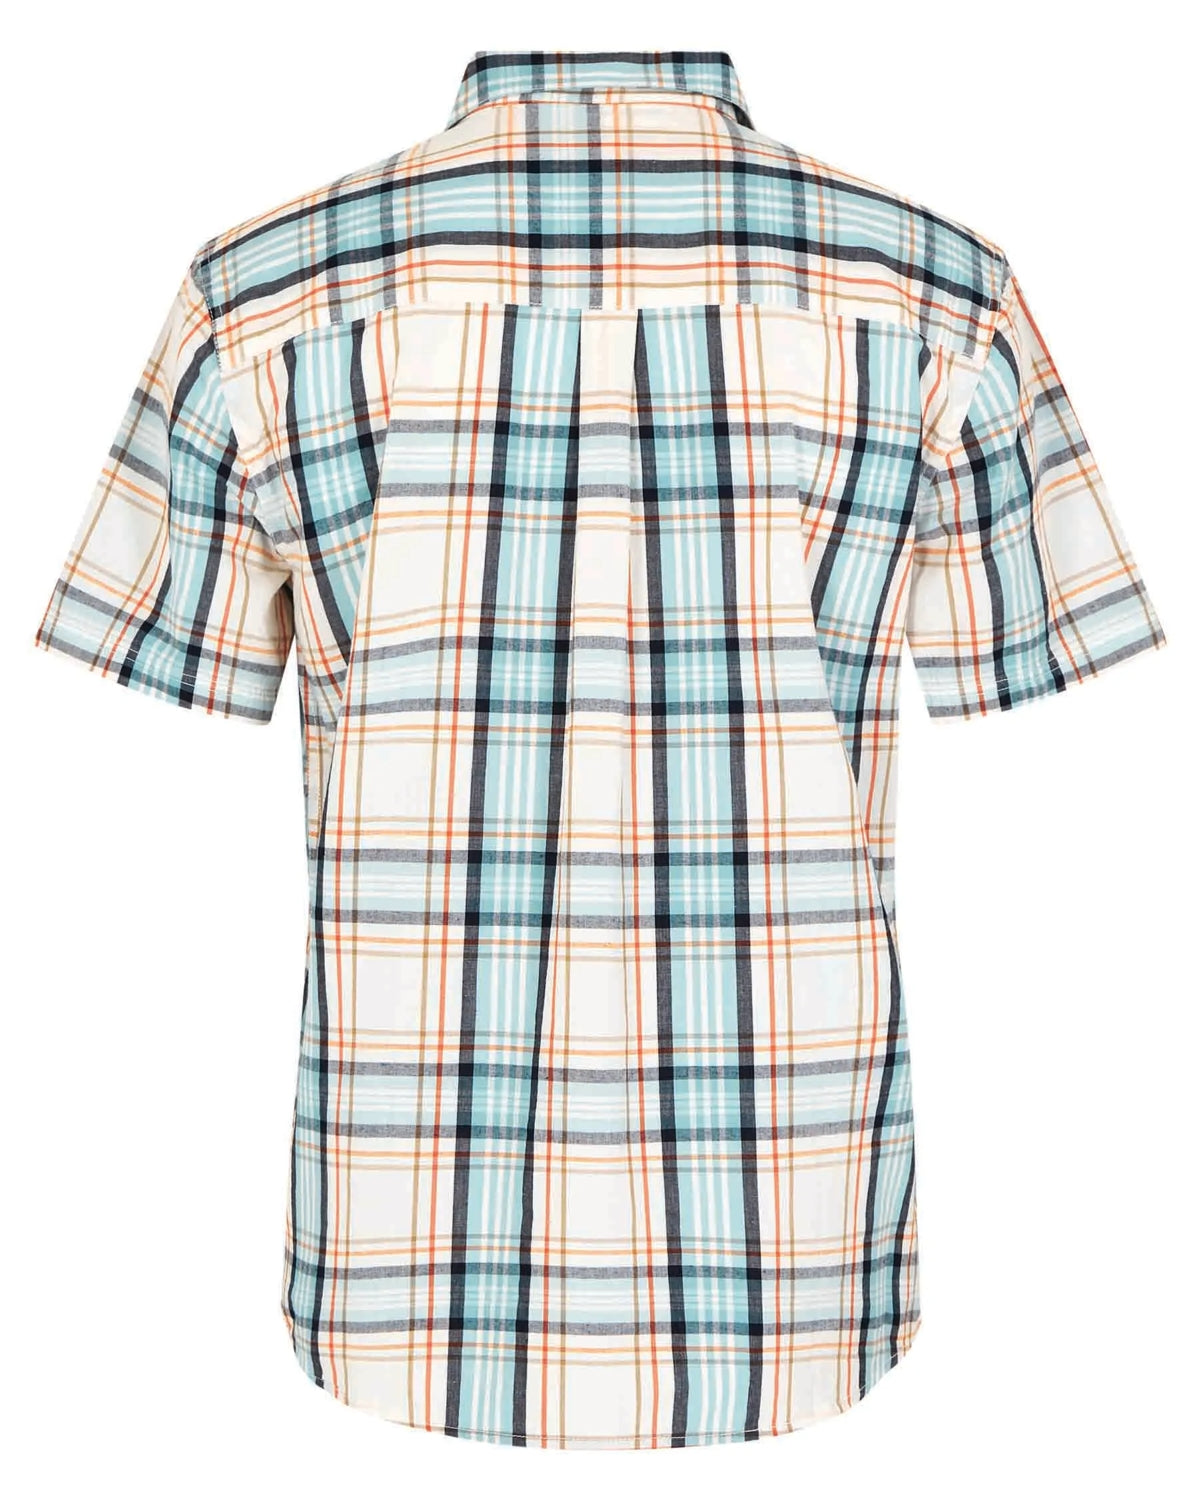 Men's check patterned Judd short sleeve shirt from Weird Fish in ecru with an orange and blue pattern.